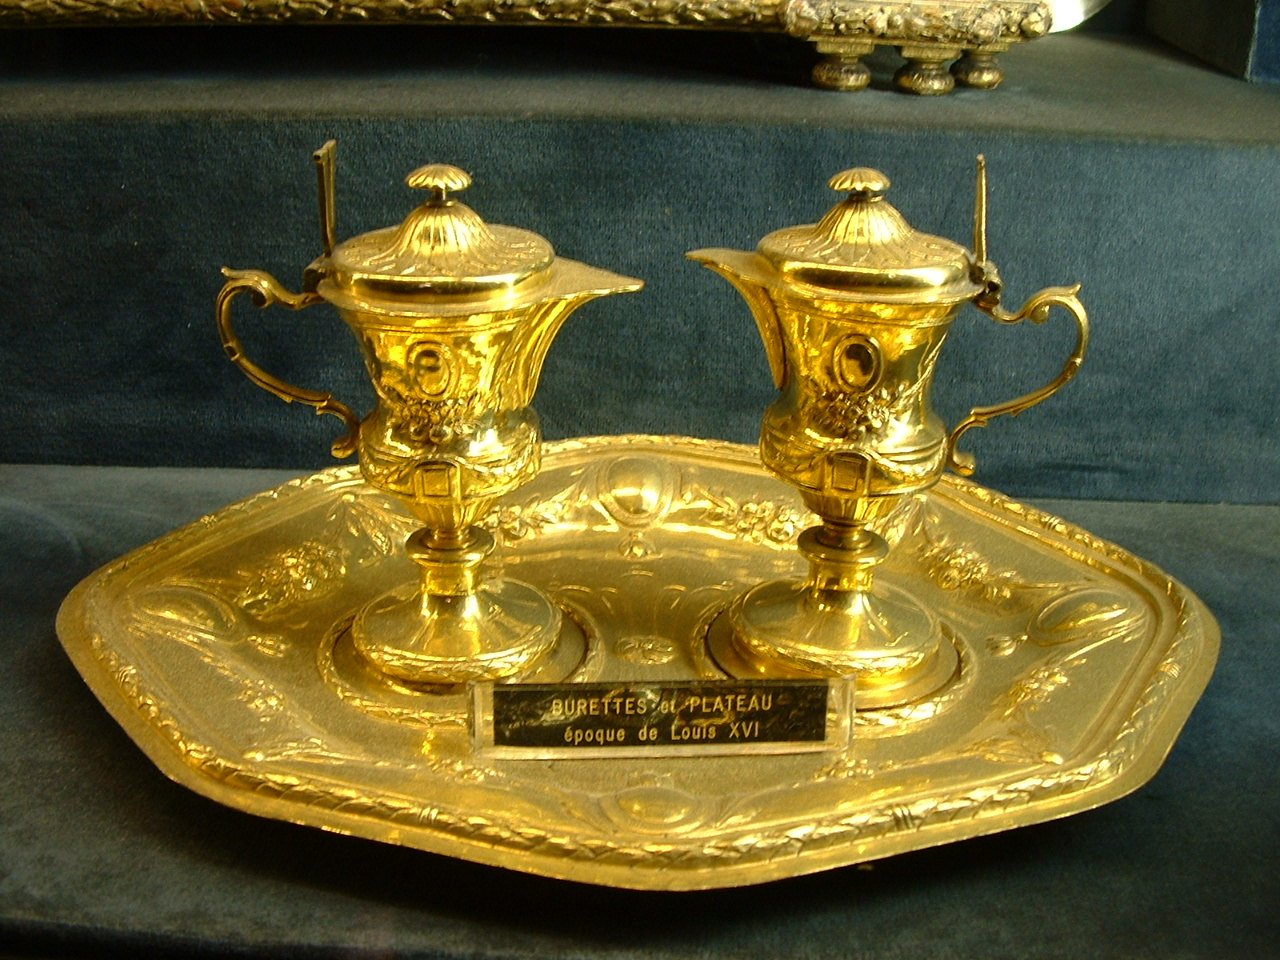 two golden coffee pots sitting on a platter